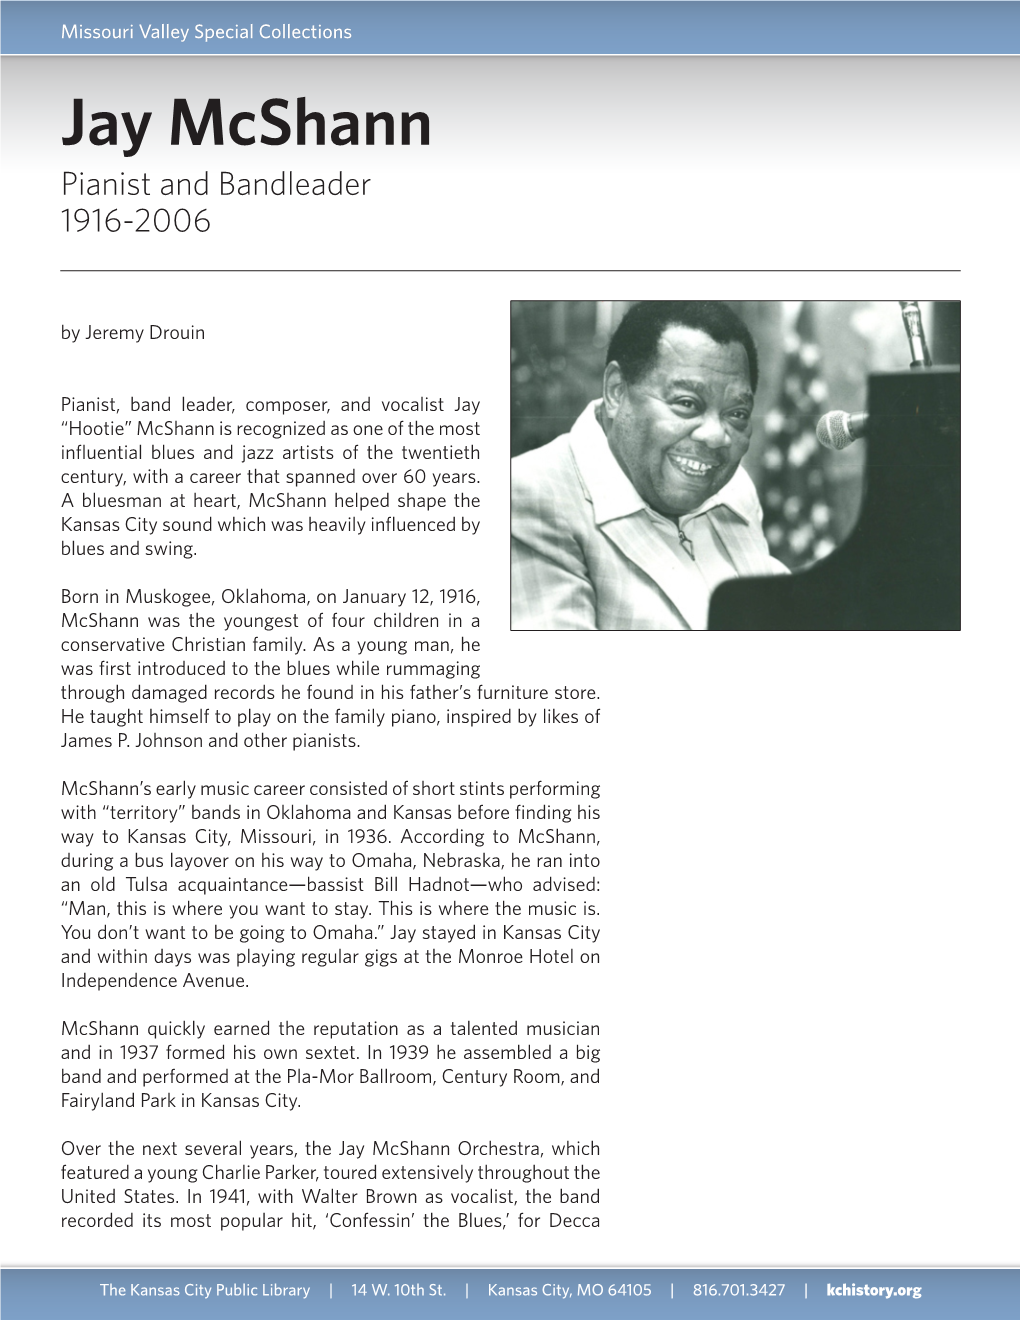 Jay Mcshann Pianist and Bandleader 1916-2006